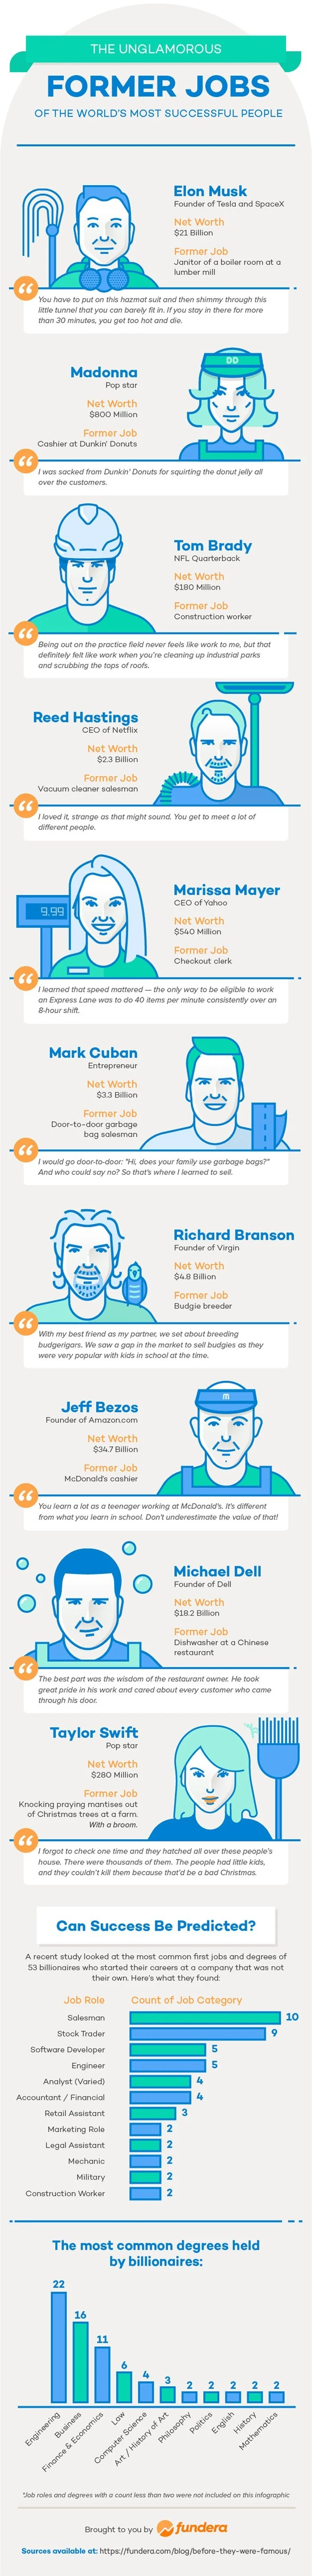 Before They Were Famous: Unglamorous First Jobs Of Successful People - #infographic